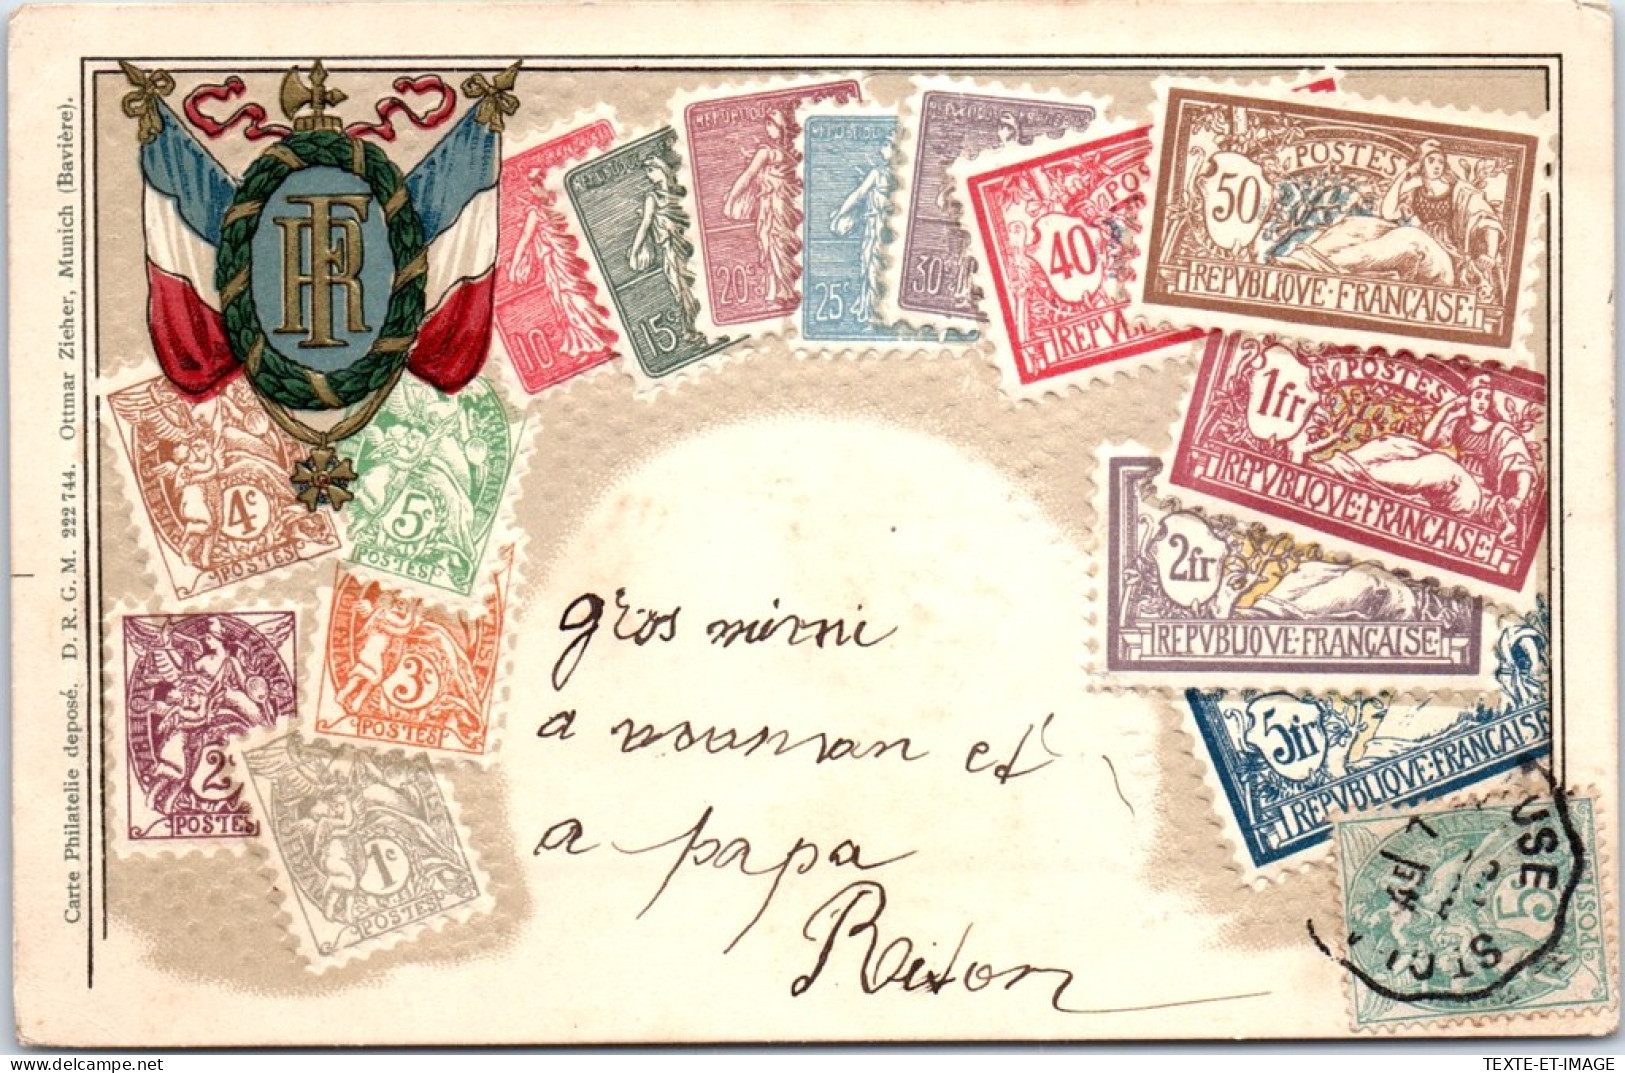 THEMES - TIMBRES - Les Timbres De France. - Stamps (pictures)